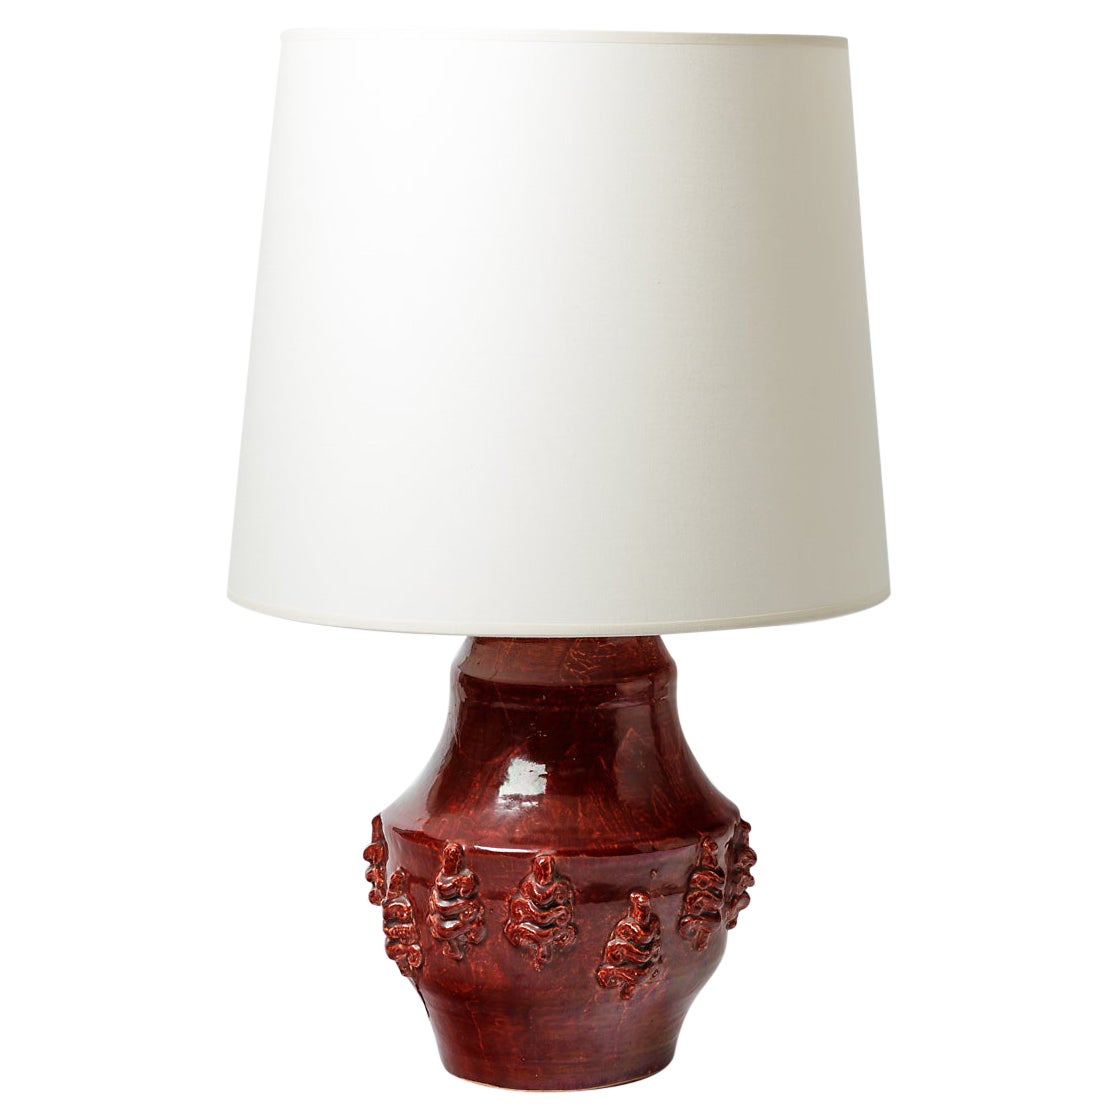 Ceramic Table Lamp by Jean Austry, circa 1970-1980 For Sale